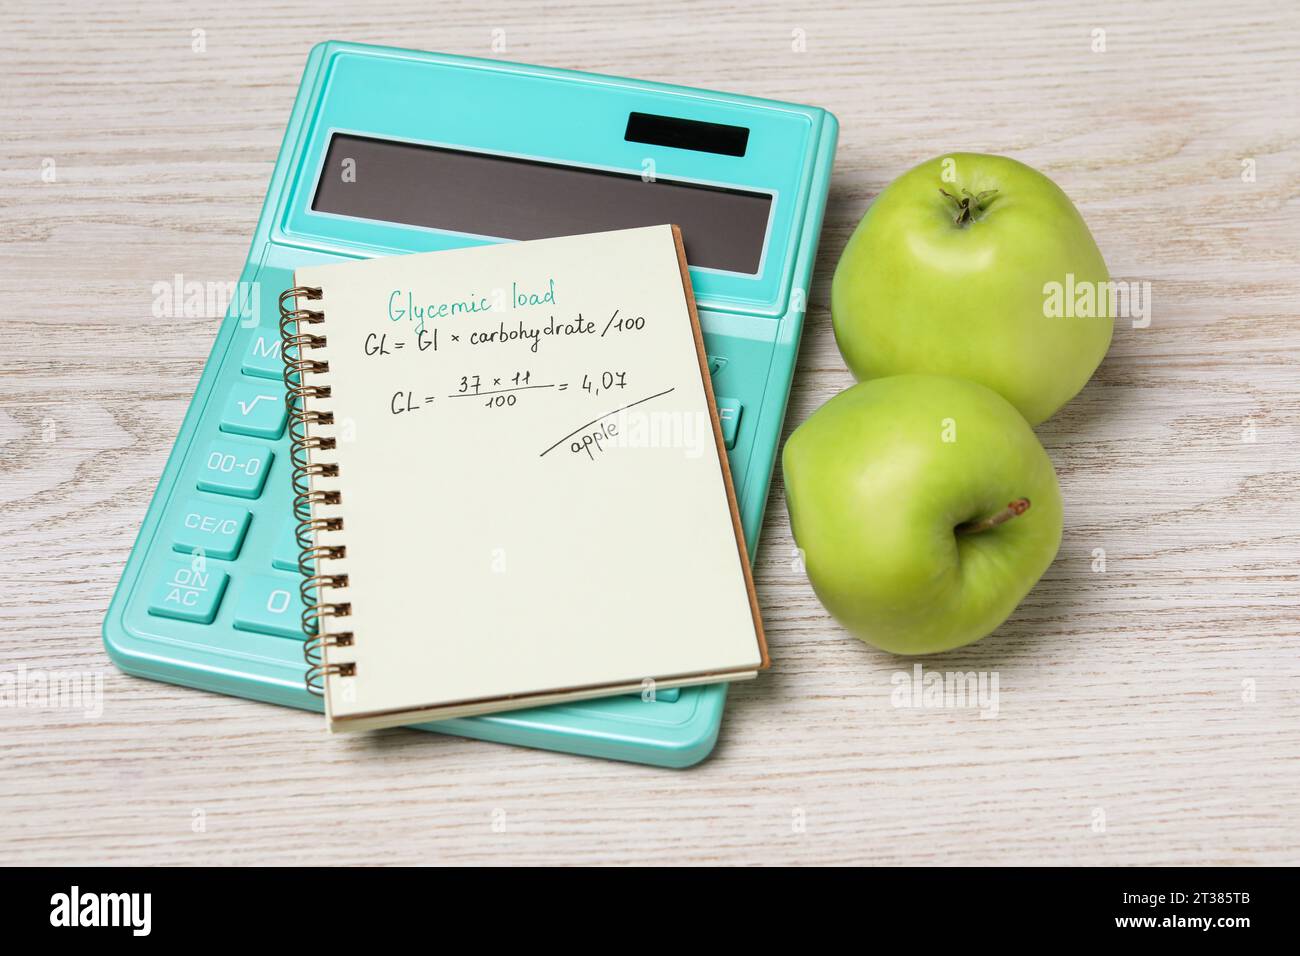 Notebook with calculated glycemic load for apples, calculator and fresh fruits on light wooden table Stock Photo